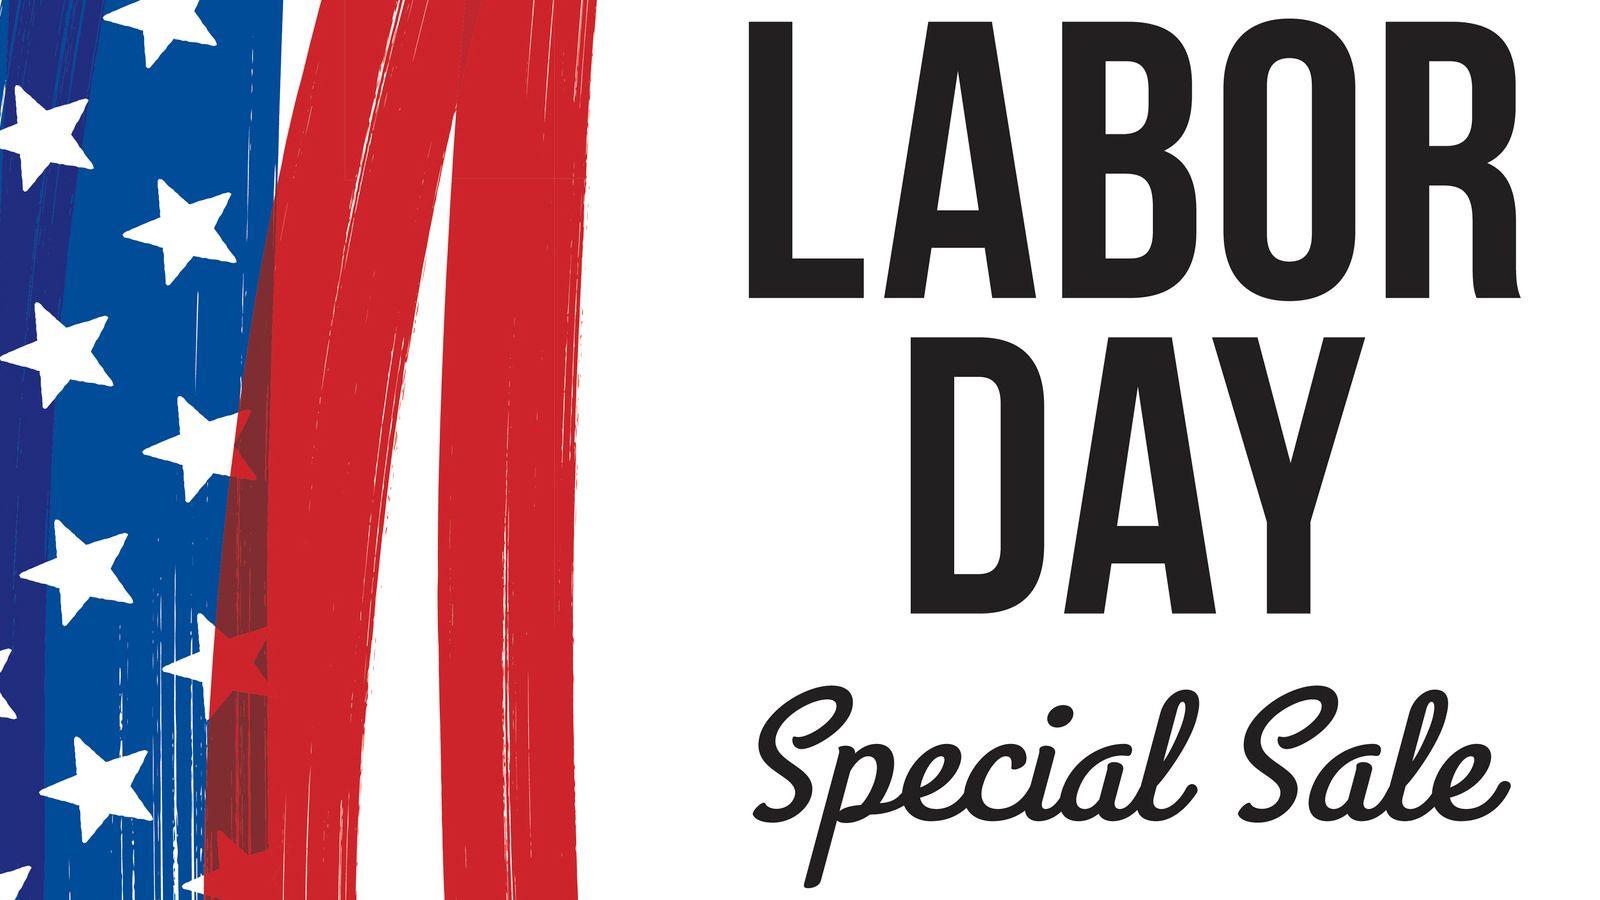 Best Labor Day sales 2020: The best Labor Day sales you can't afford to miss!